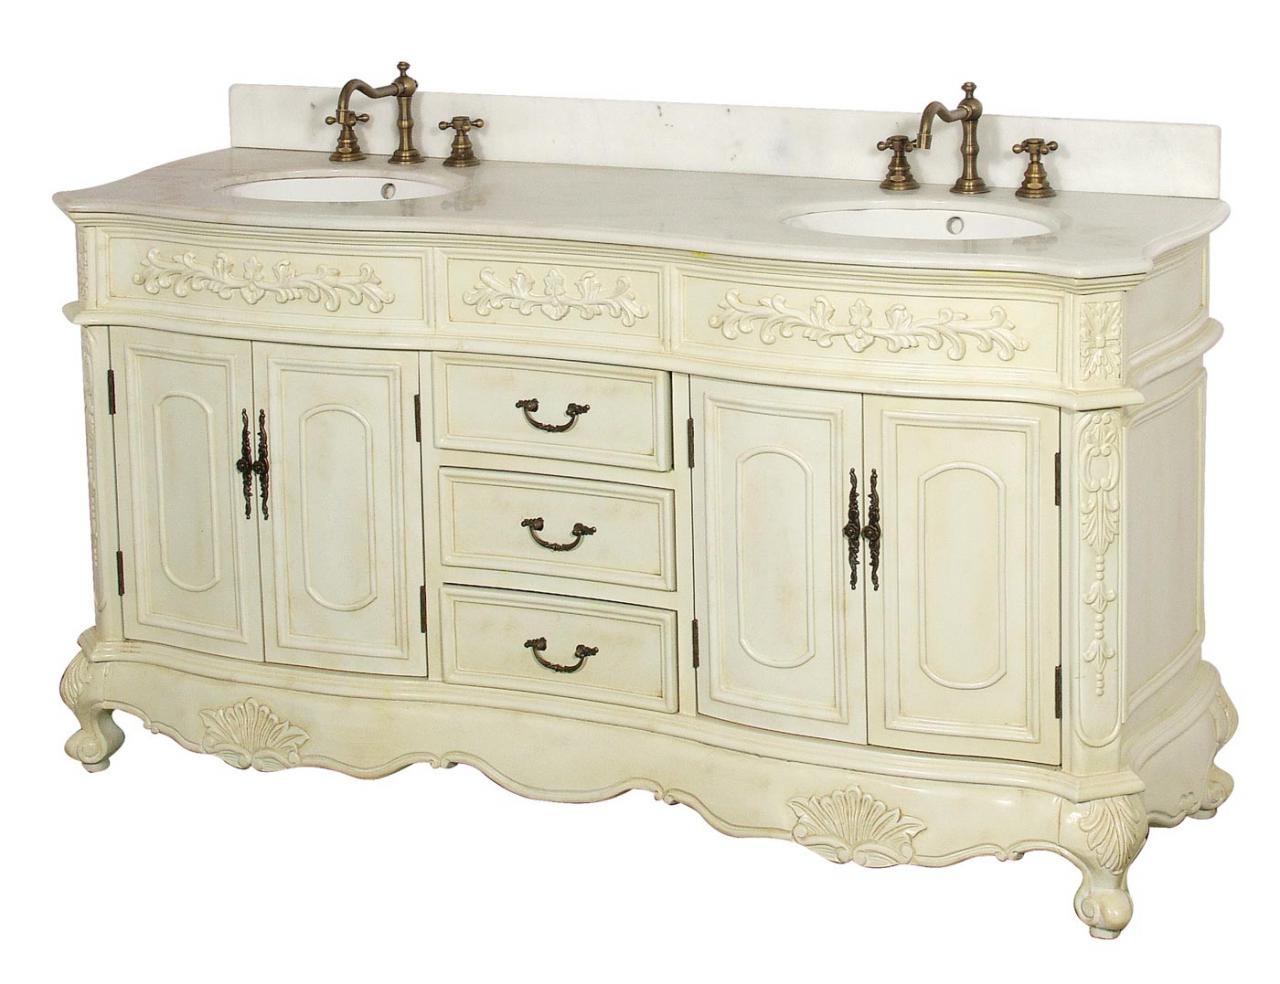 Antique Bathroom Vanity With Drawers And Legs